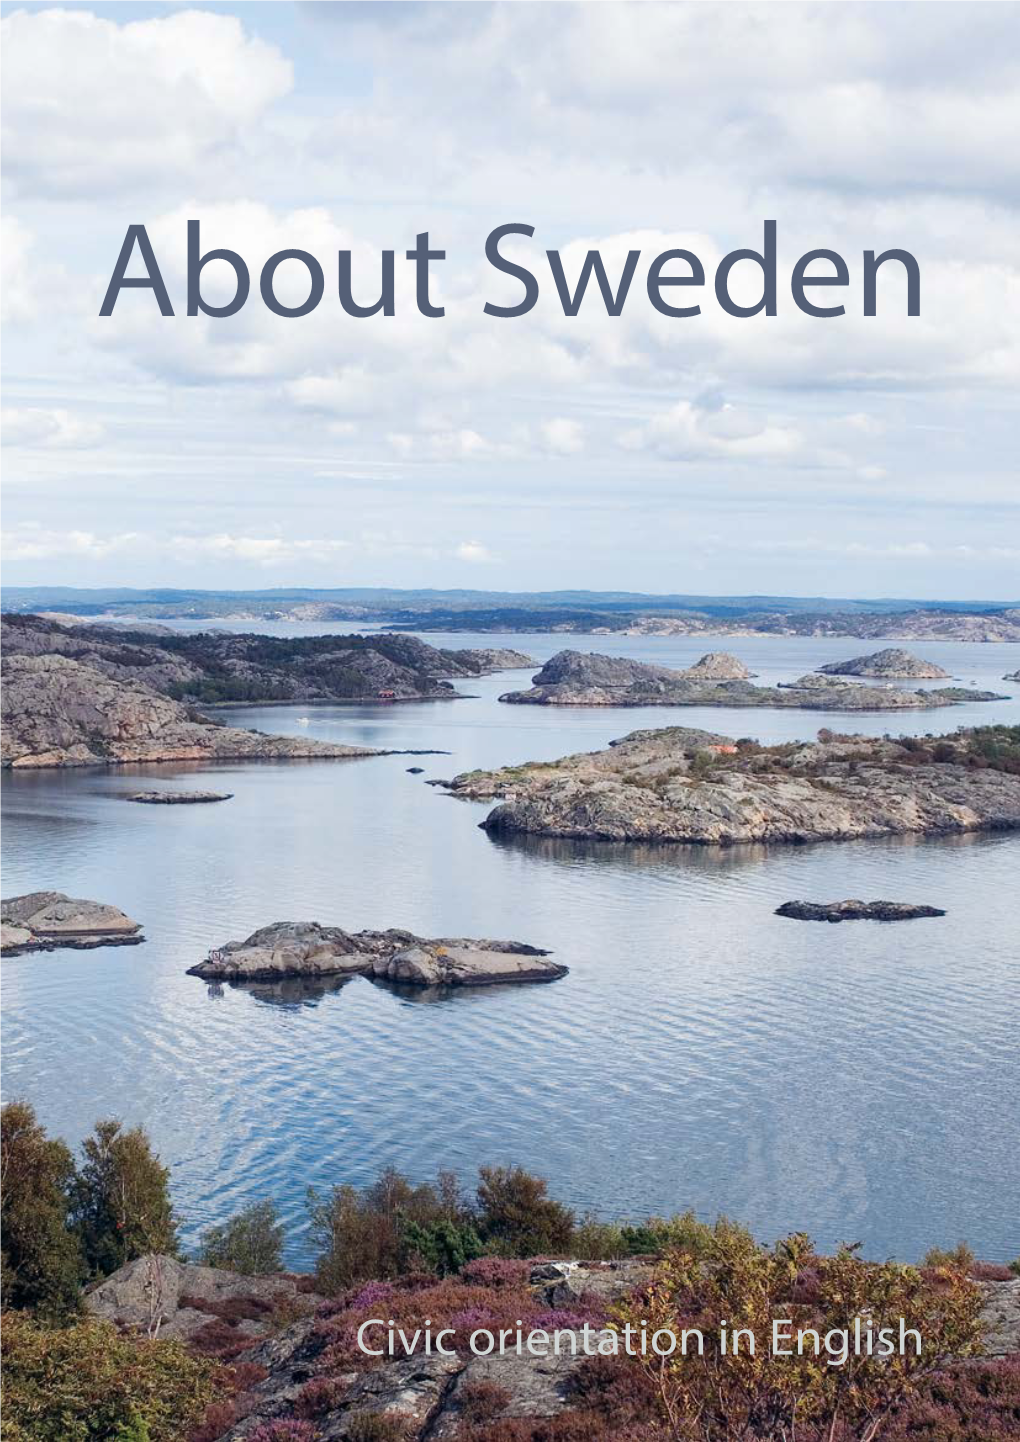 Civic Orientation in English “About Sweden” Is a Civic Orientation Handbook for Newly Arrived